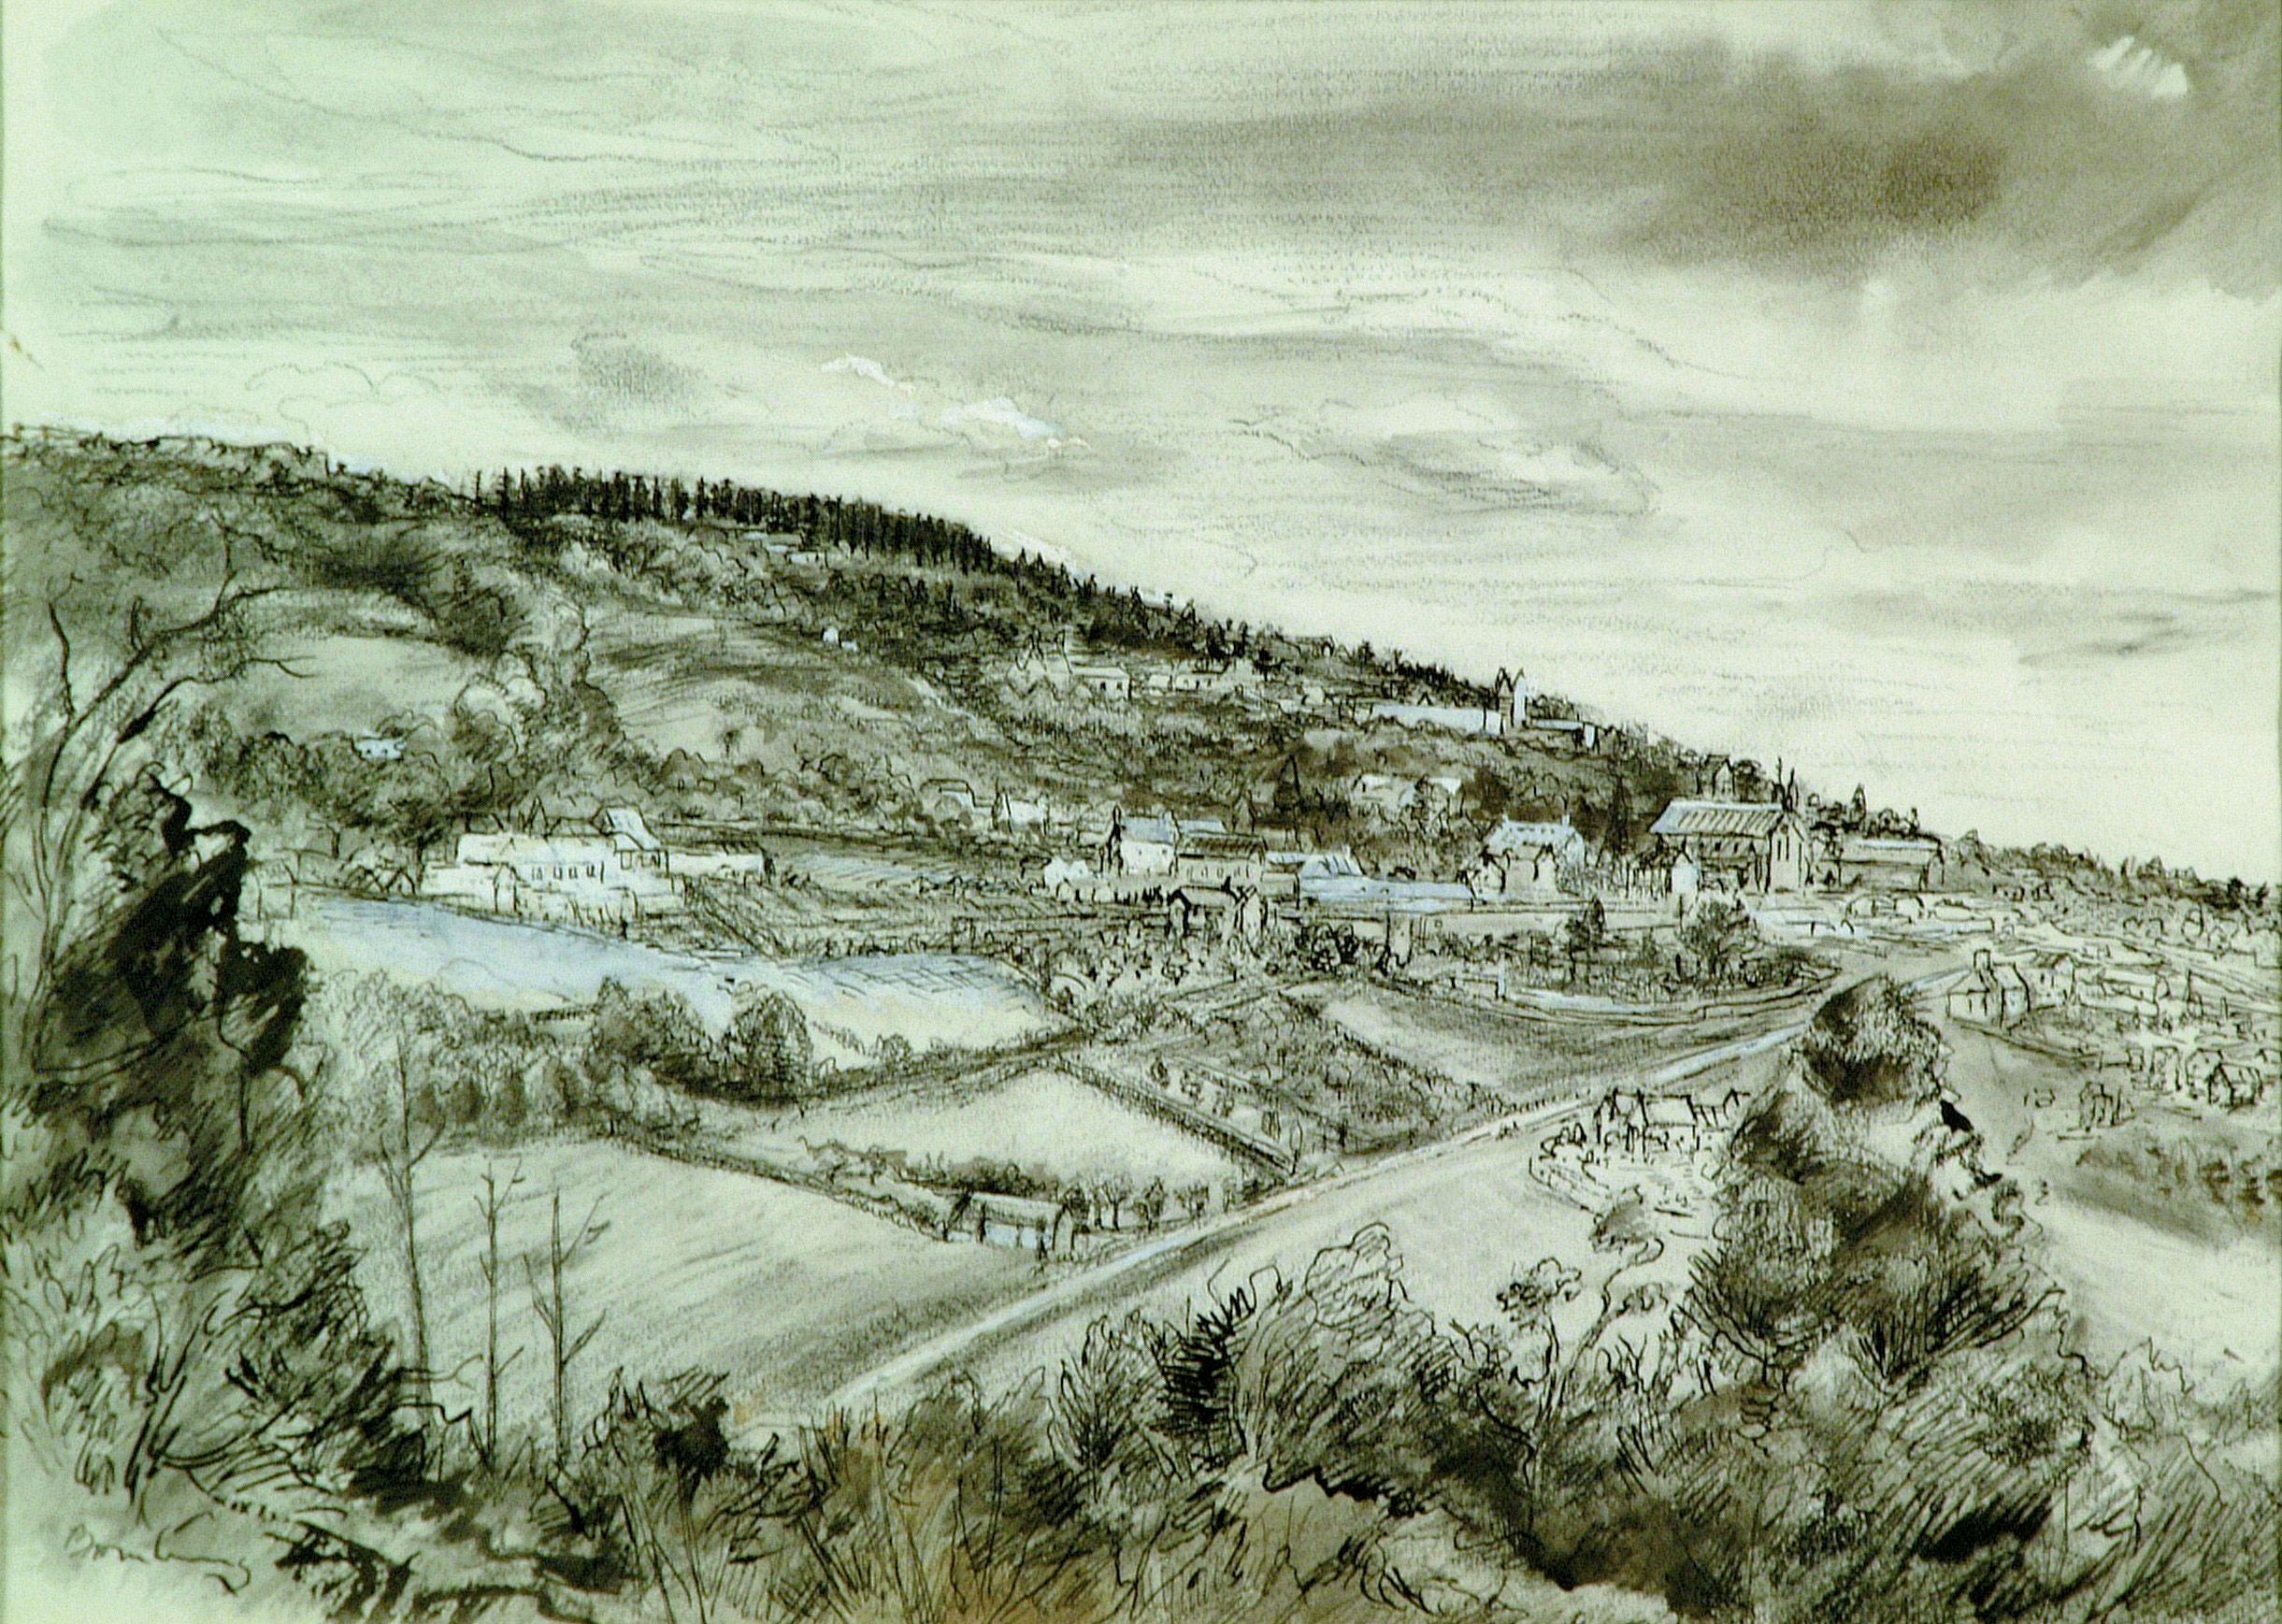 A wartime sketch of the picturesque French village of Mortain on the slope of its strategic hill was captured by combat artist Manuel Bromberg. Troops of the U.S. 30th Infantry Division stymied a German offensive at Mortain in August 1944.